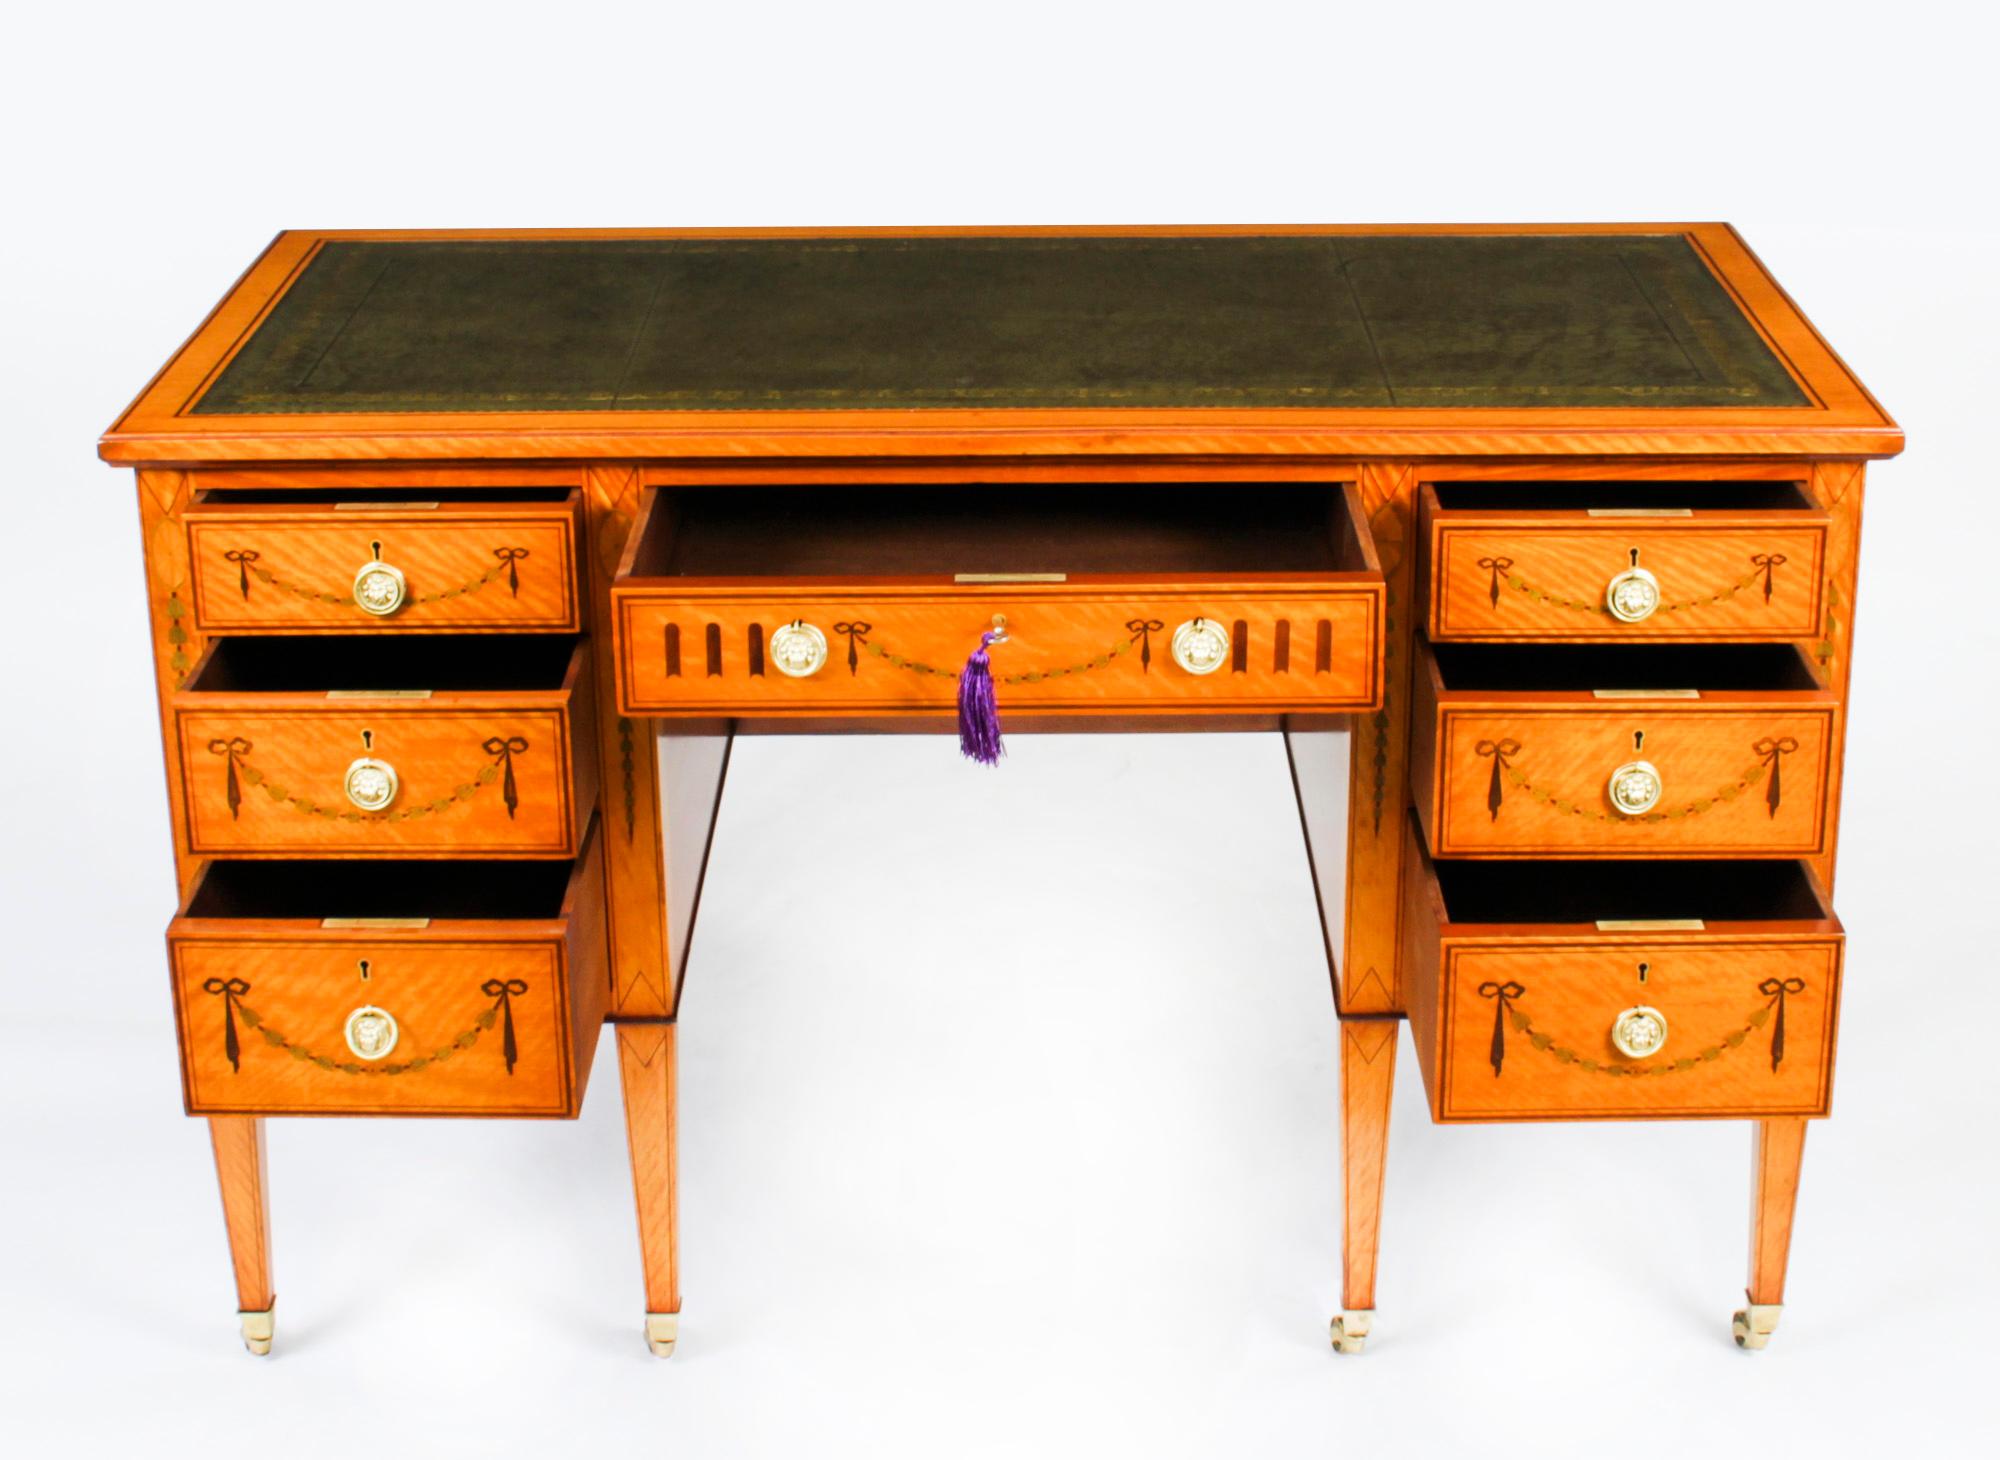 Antique Inlaid Satinwood Writing Table Desk by Edwards & Roberts, 19th Century For Sale 7